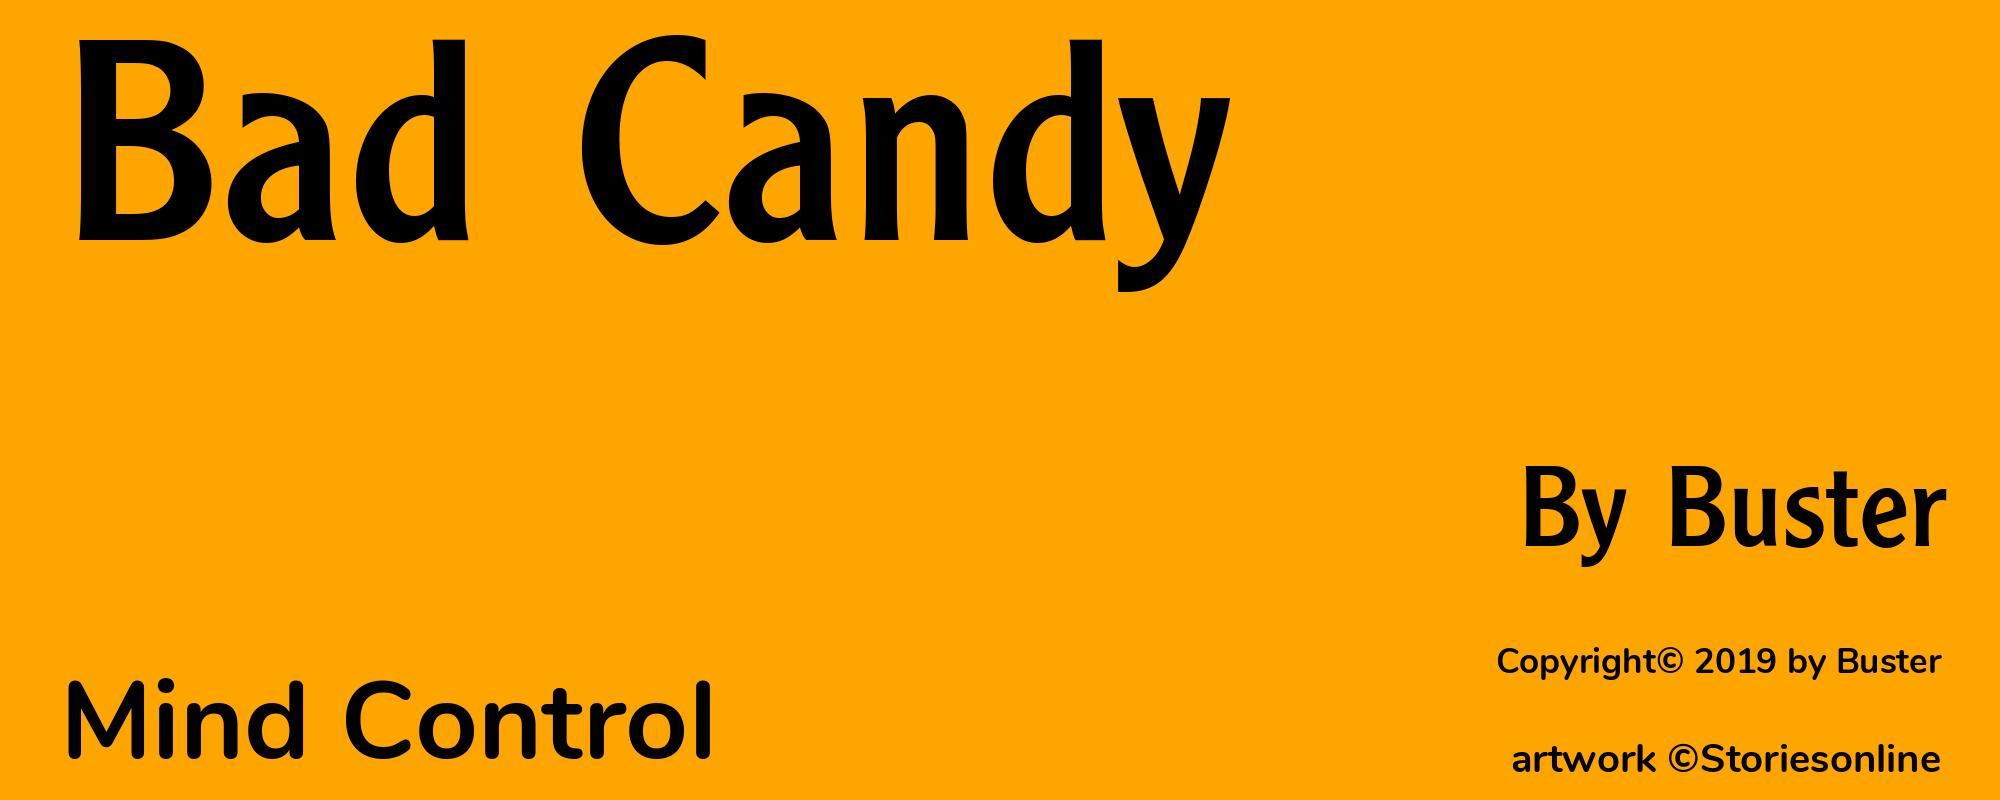 Bad Candy - Cover